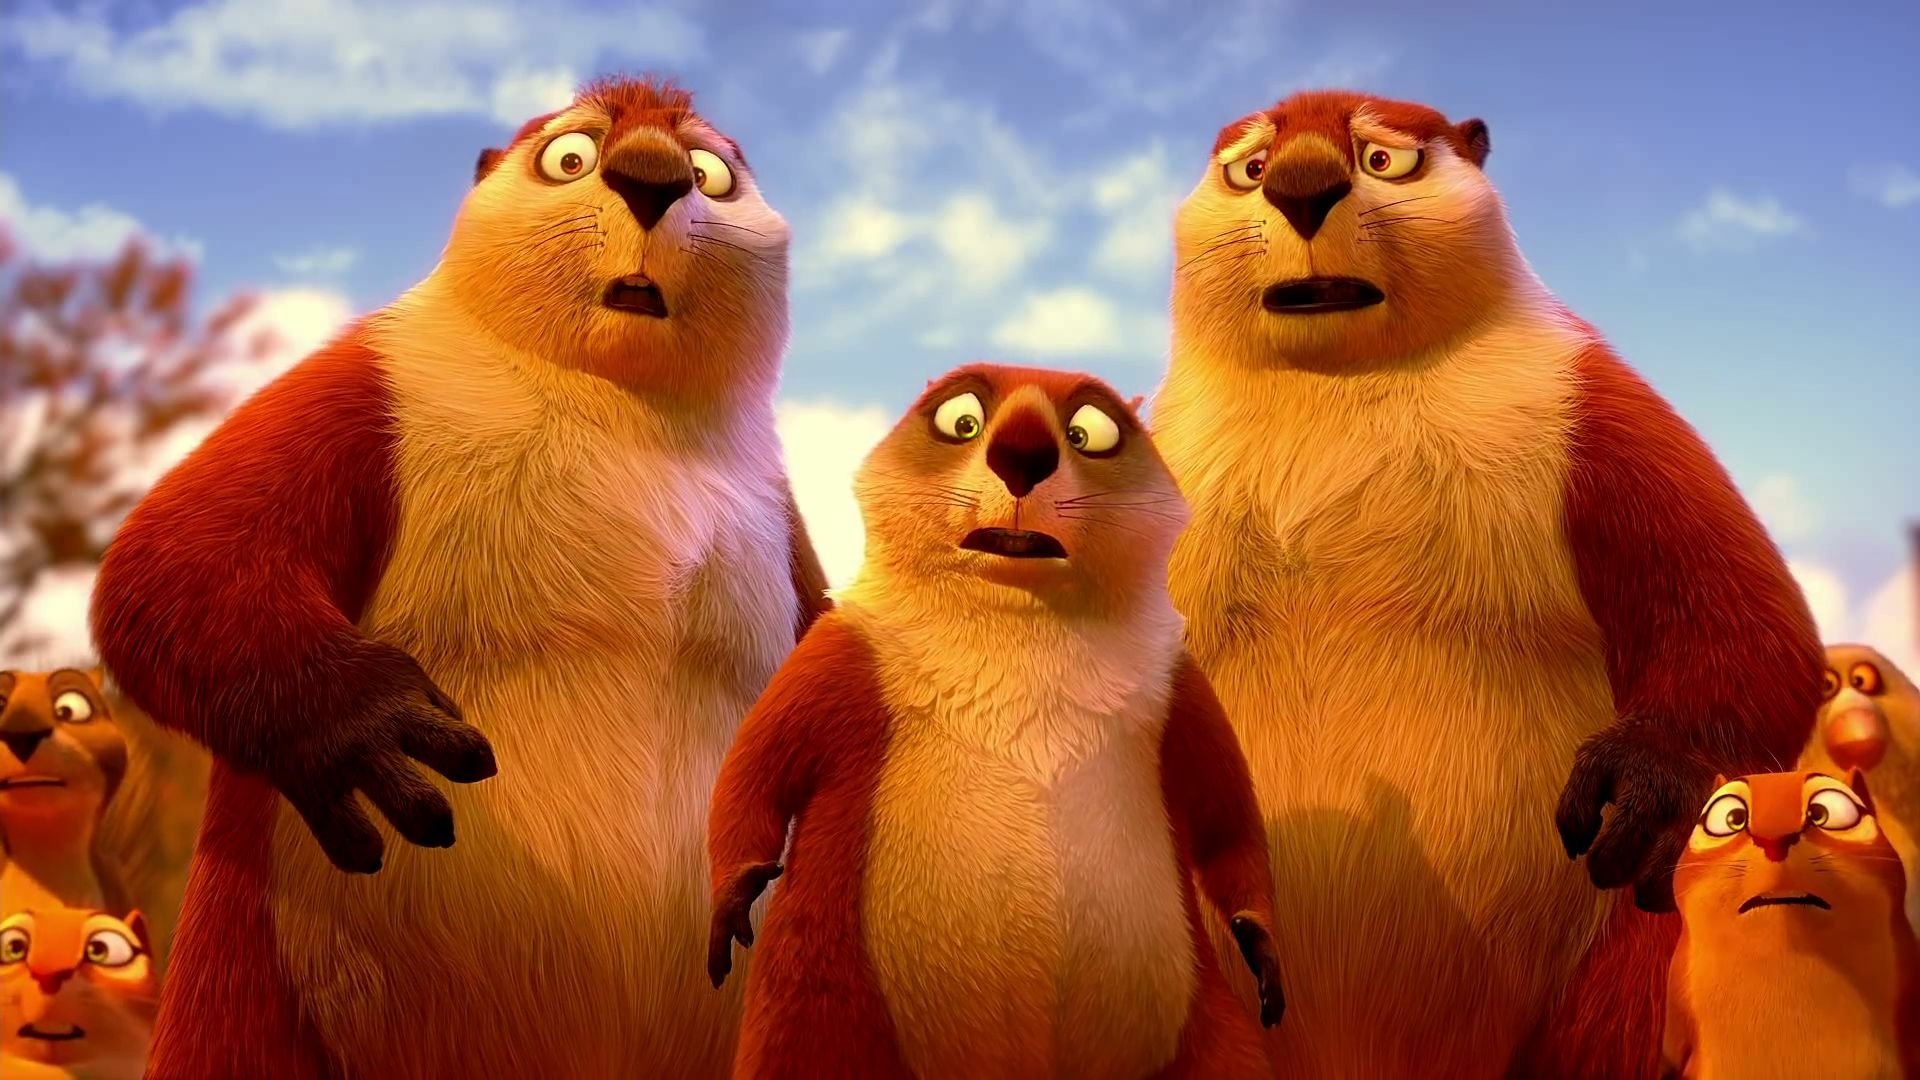 The Nut Job HD Wallpaper Background Image 1920x1080.